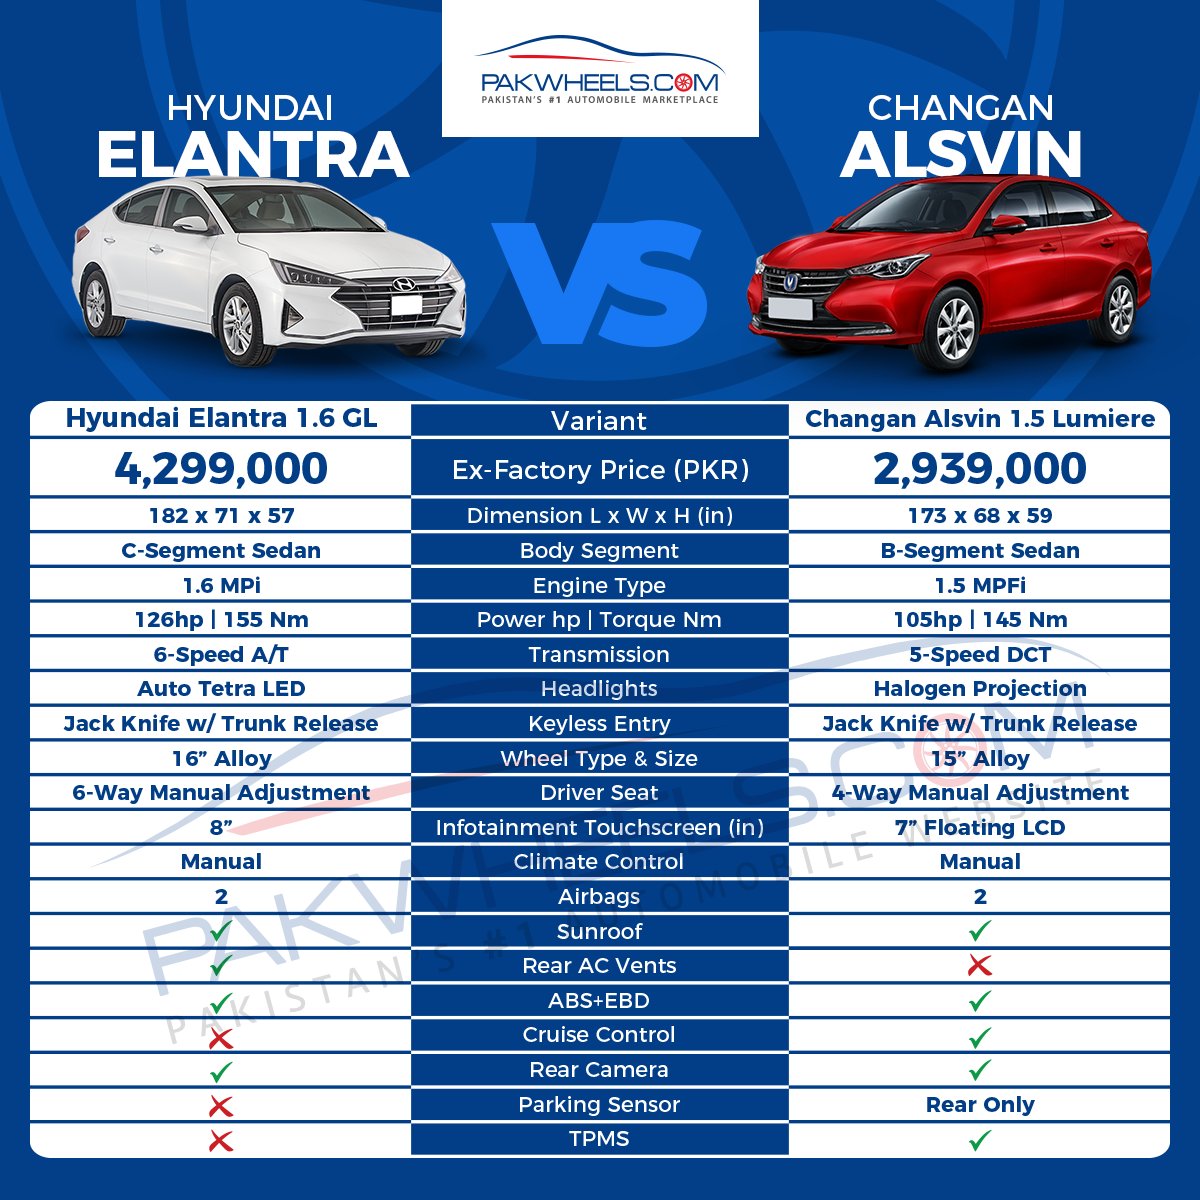 contaminación Desobediencia extremadamente PakWheels.com on Twitter: "Here we compare the notable specs and features  of Hyundai Elantra 1.6L vs Alsvin 1.5L Lumiere, so you can buy the car of  your choice. Detailed comparison is here: